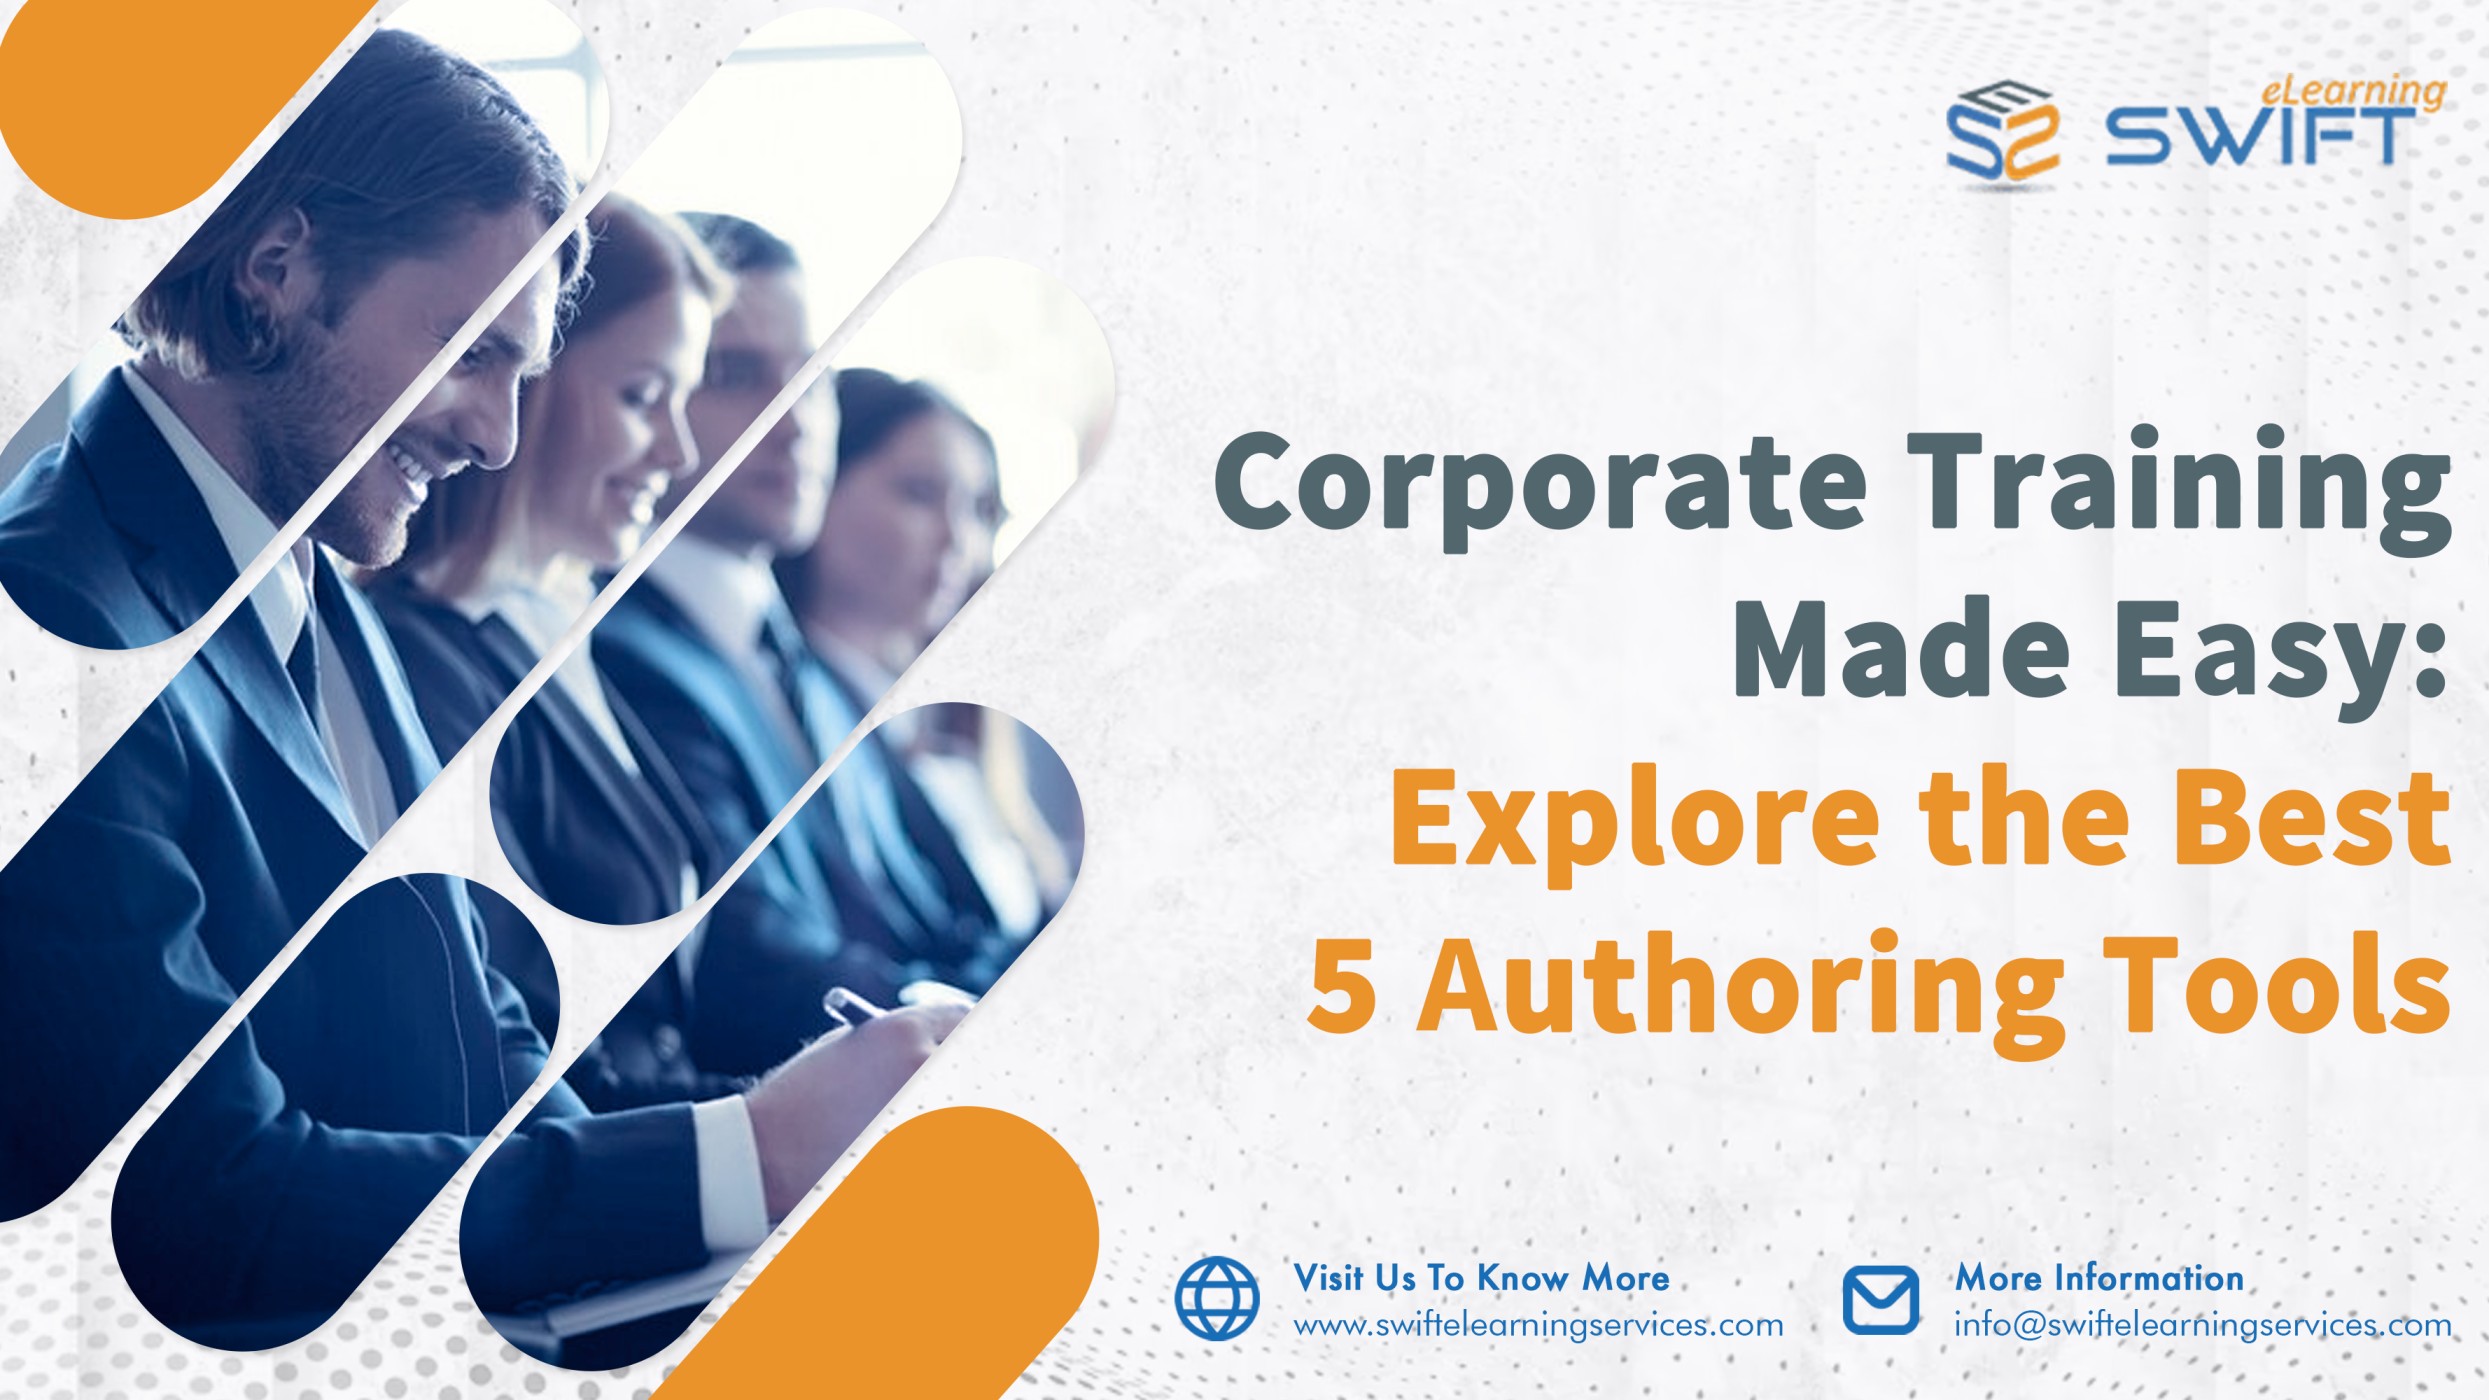 Corporate Training Made Easy: Explore the Best 5 Authoring Tools